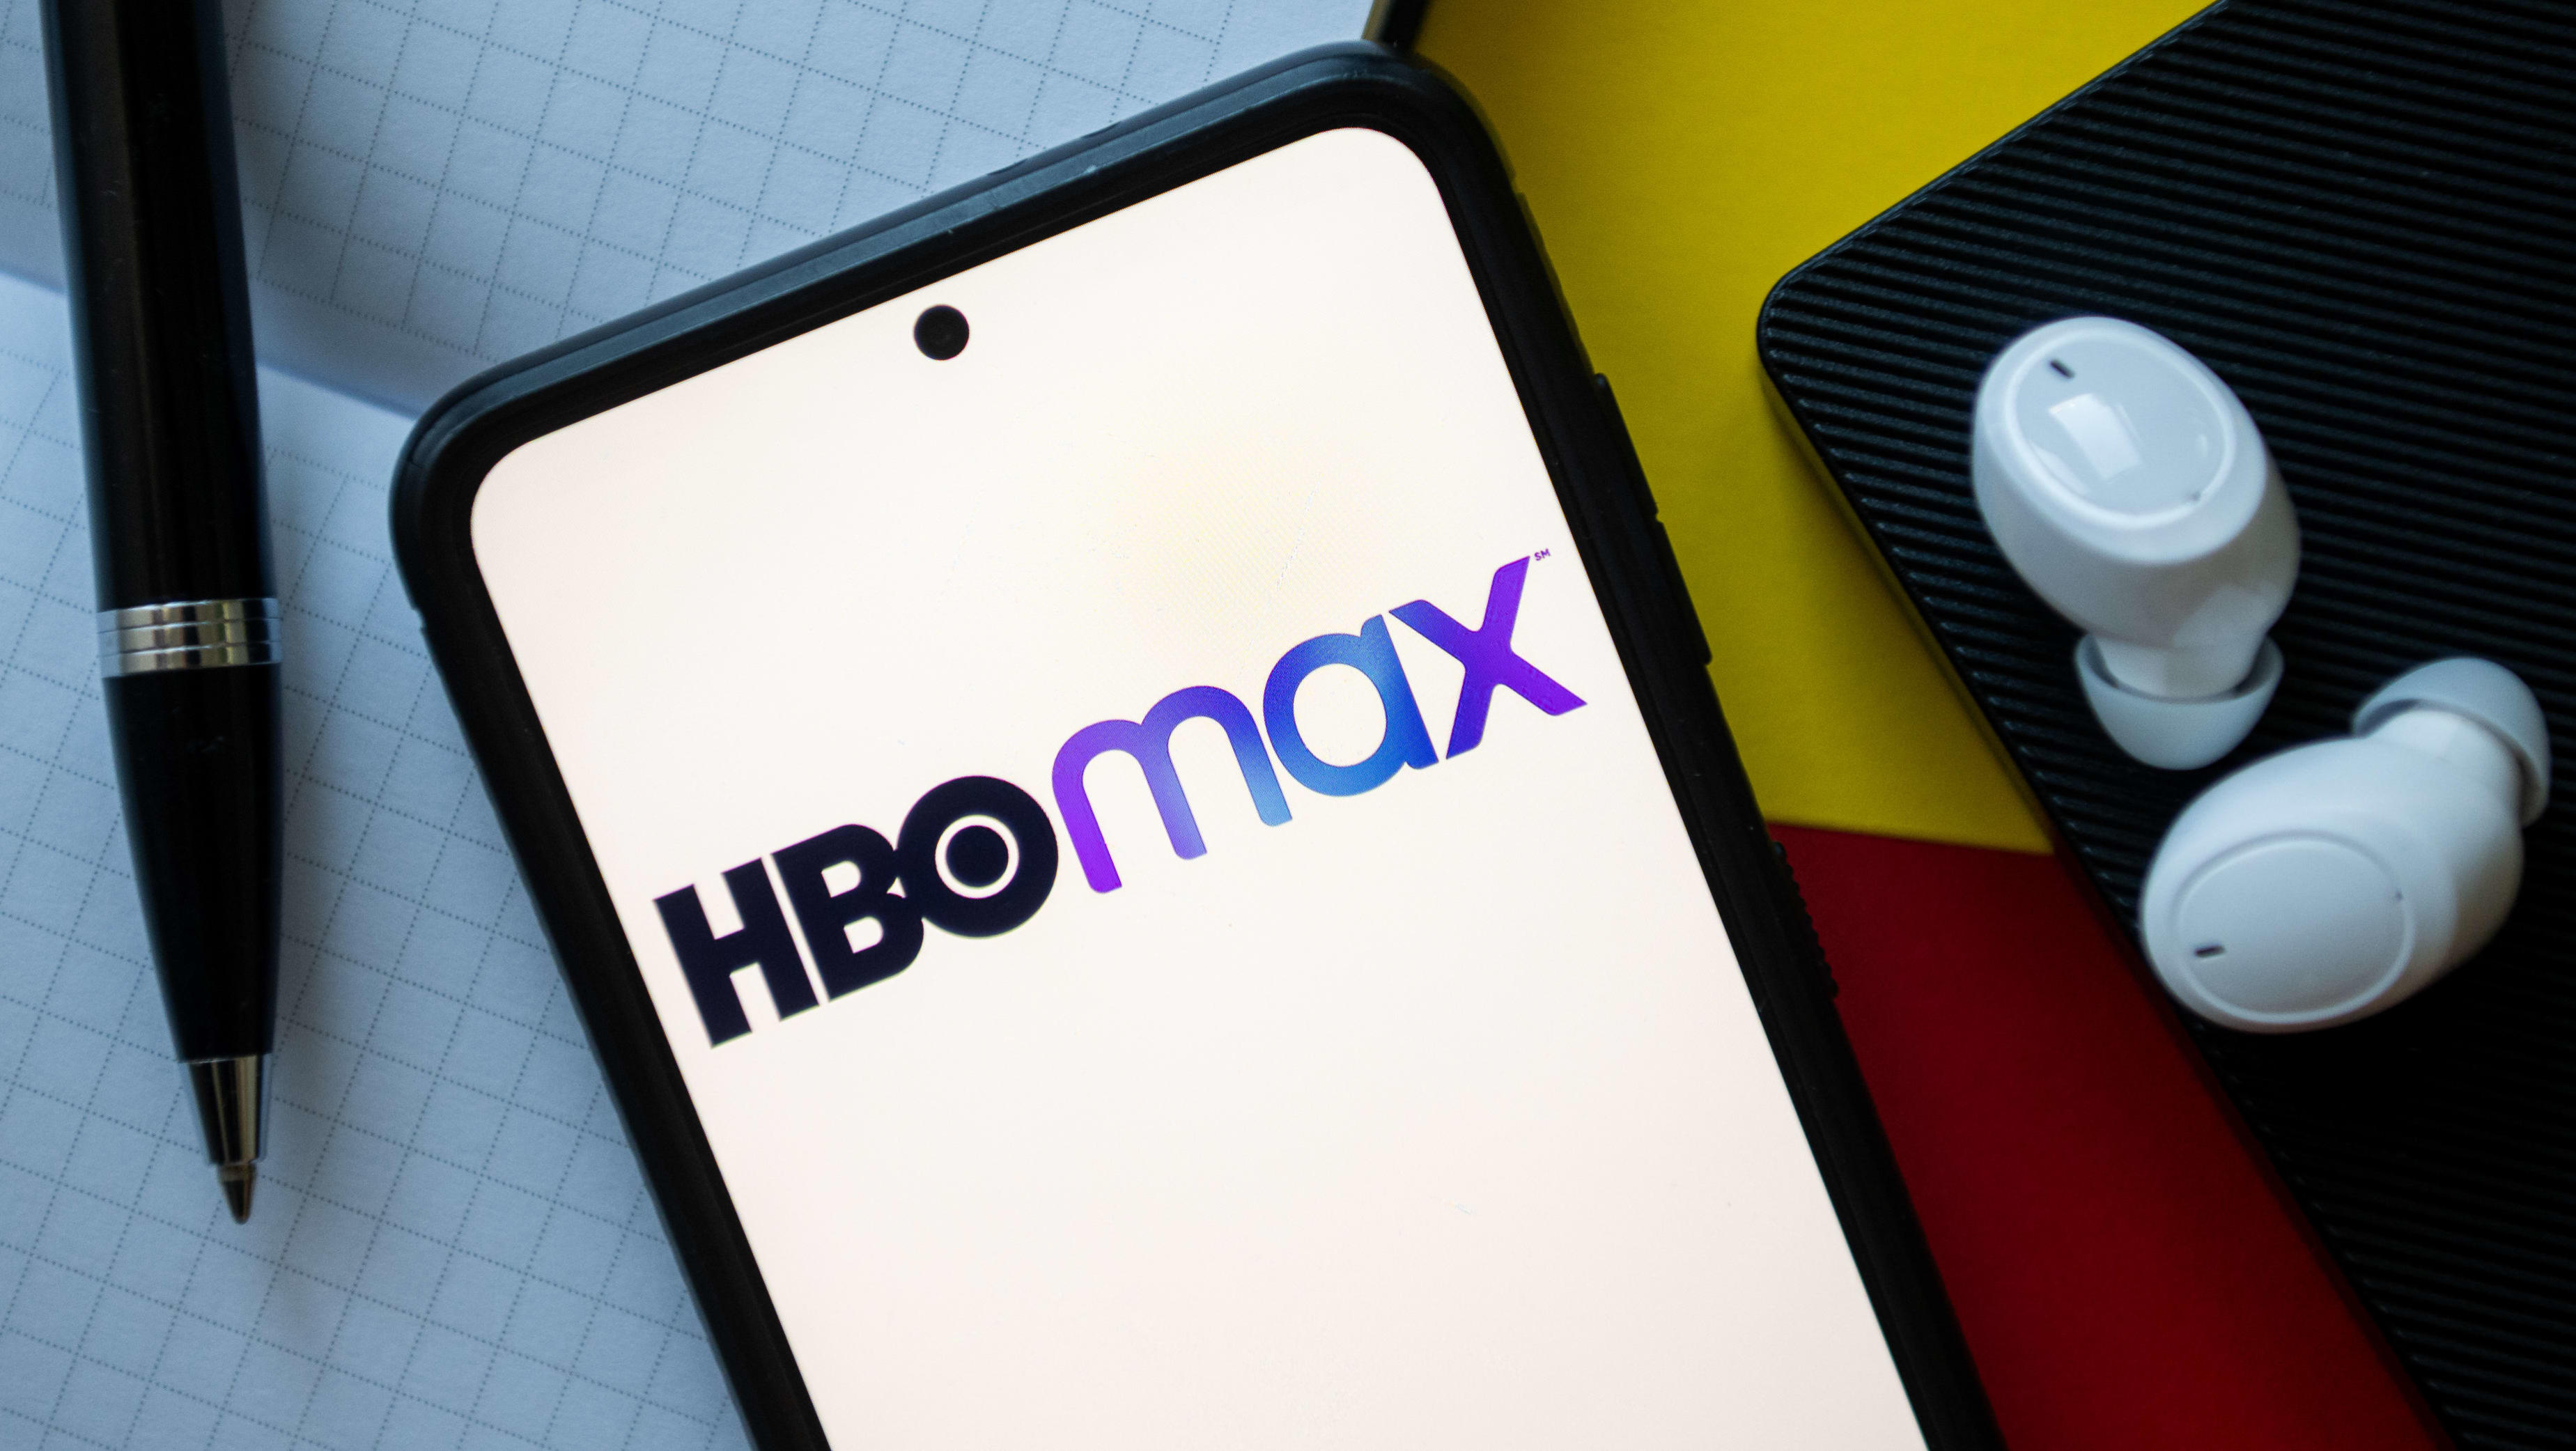 HBO Max and discovery+ Black Friday Offers Available Today